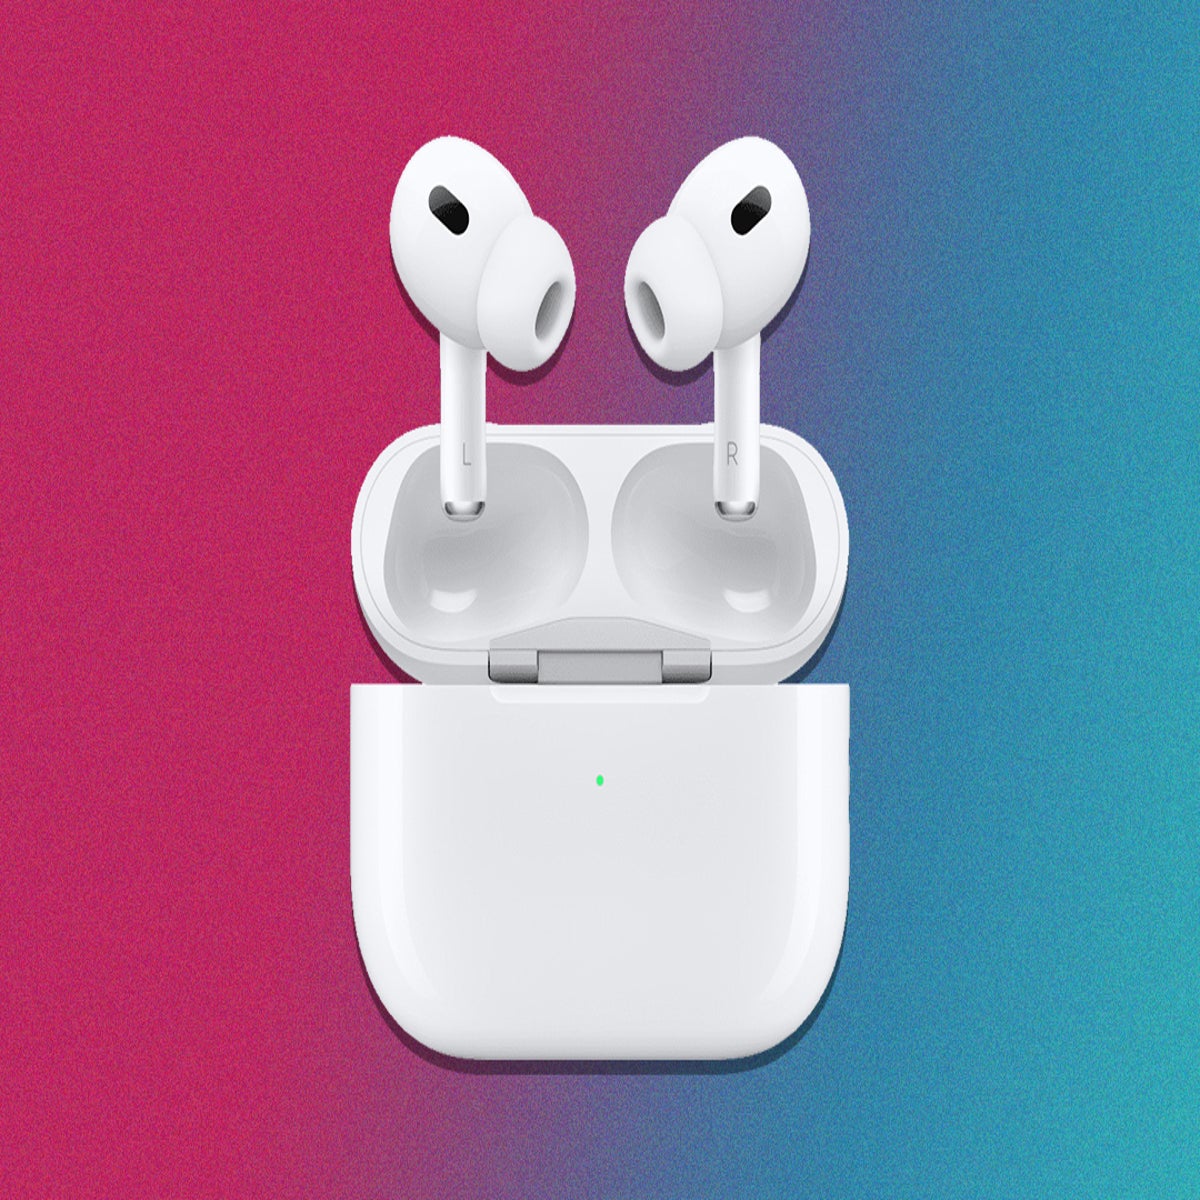 AirPods Pro 2 are the best all-around earbuds I never wanted